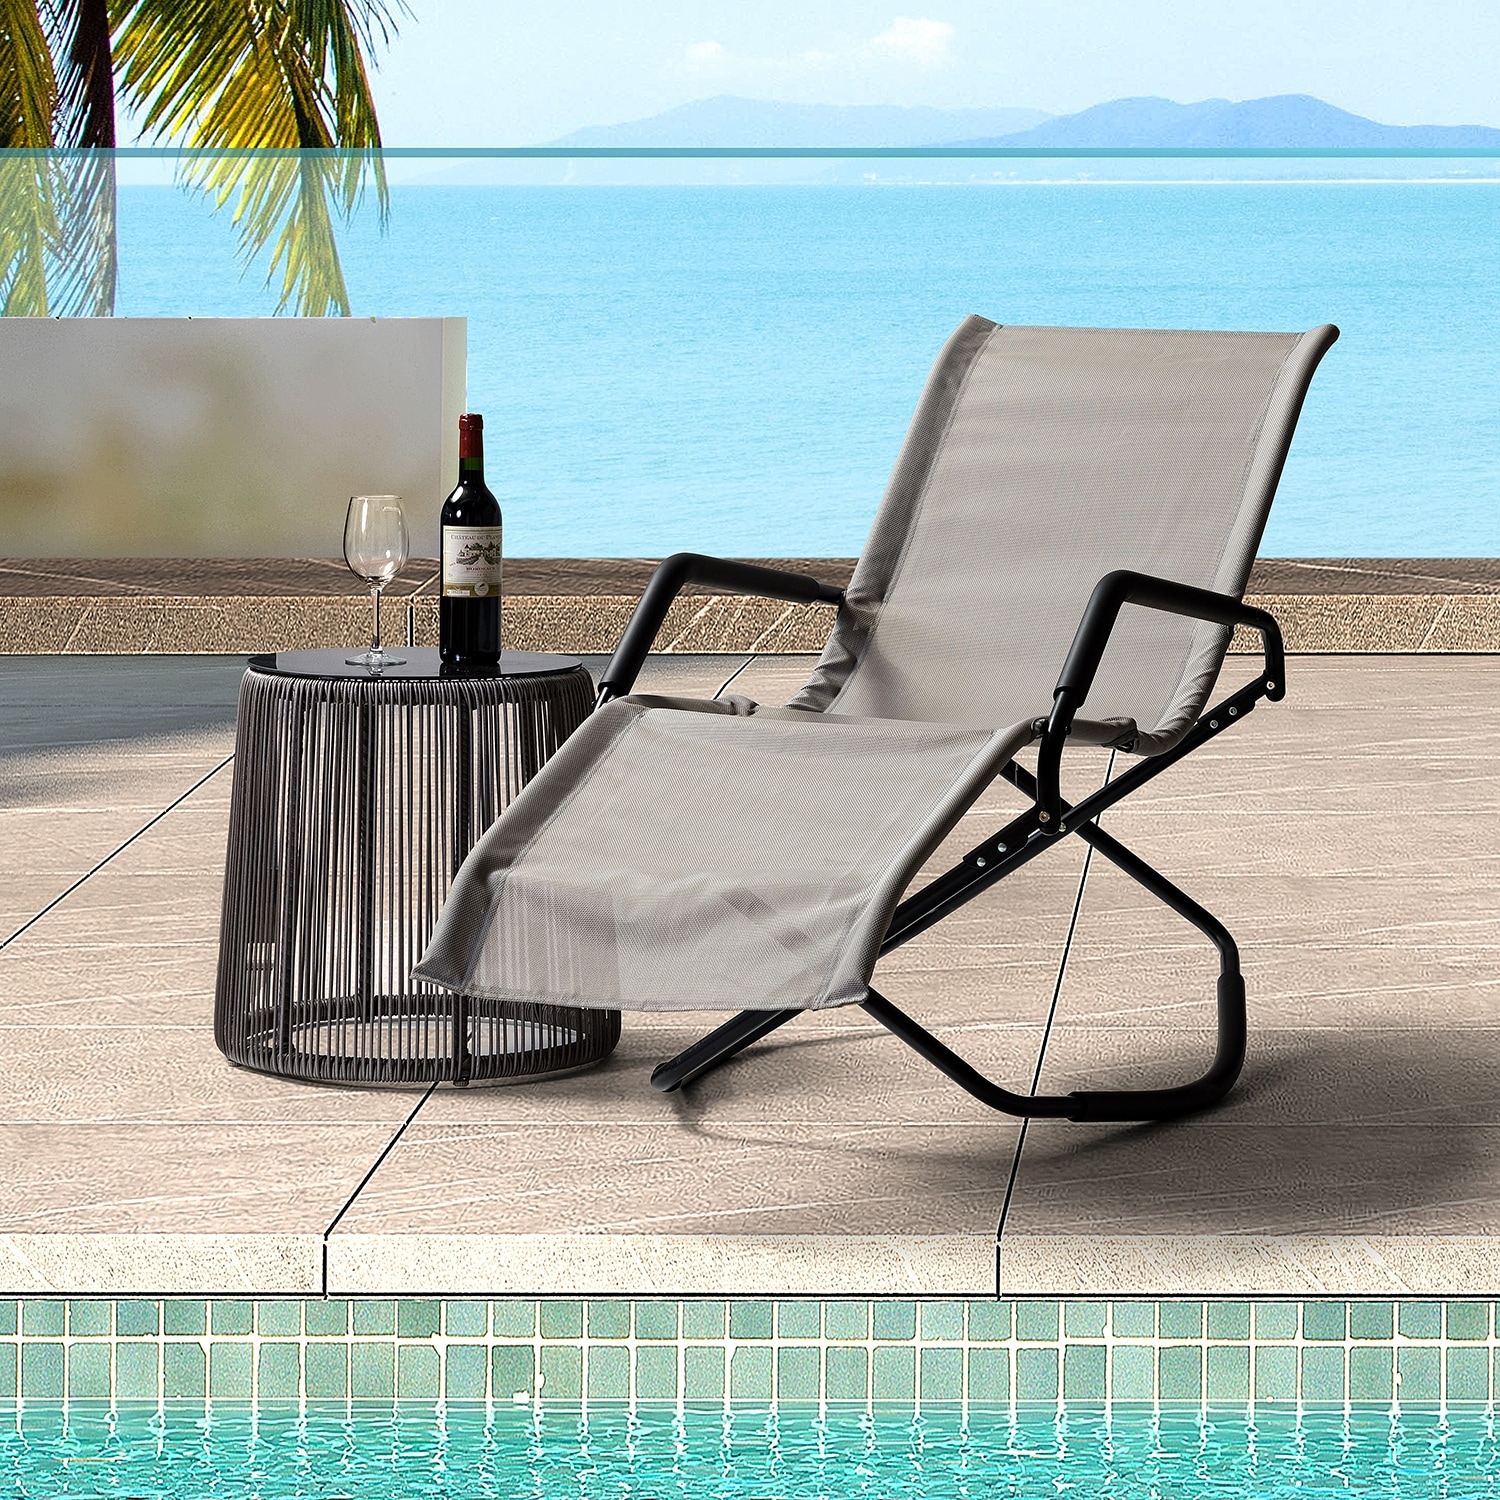 Aqarq Patio 59.7 Rocking and Glider Lounge Chair With Metal Base By Hulala Home